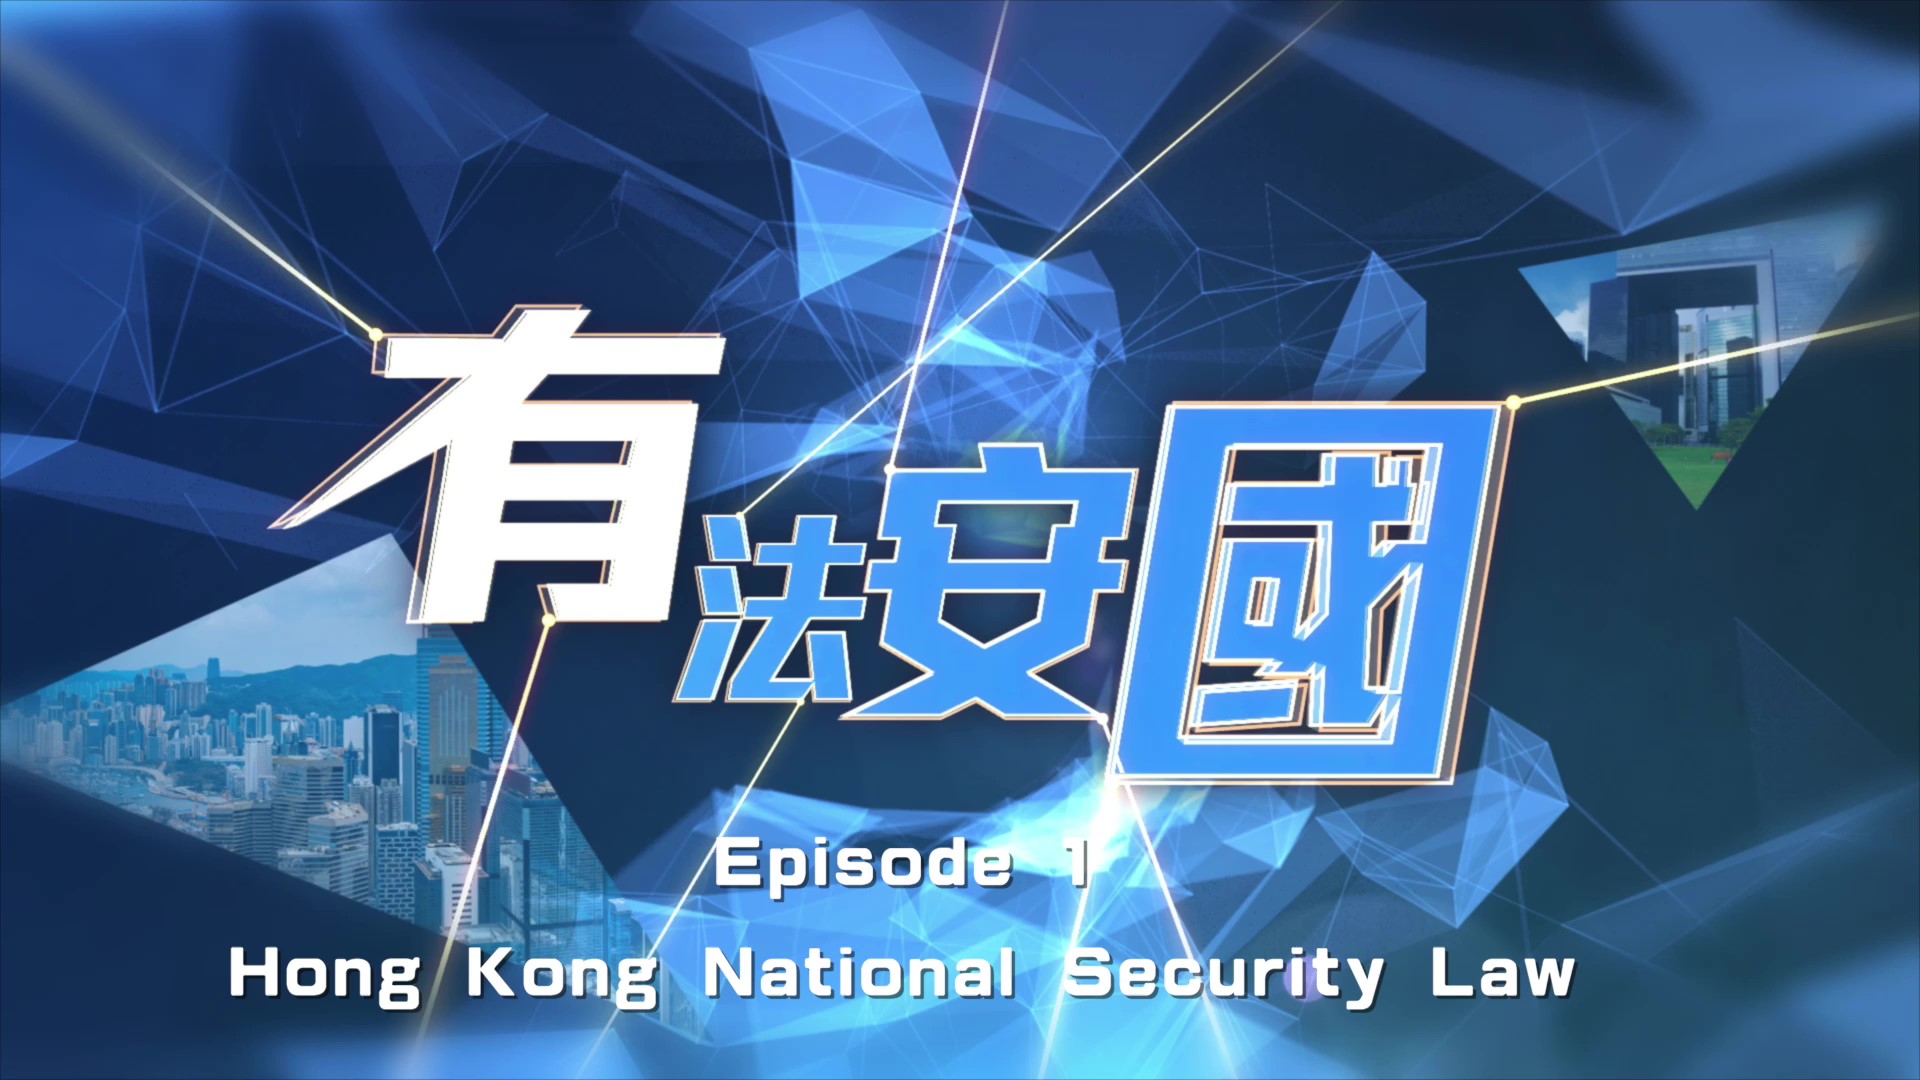 《National Security Law - Cornerstone for Prosperity & Stability》 Episode 1